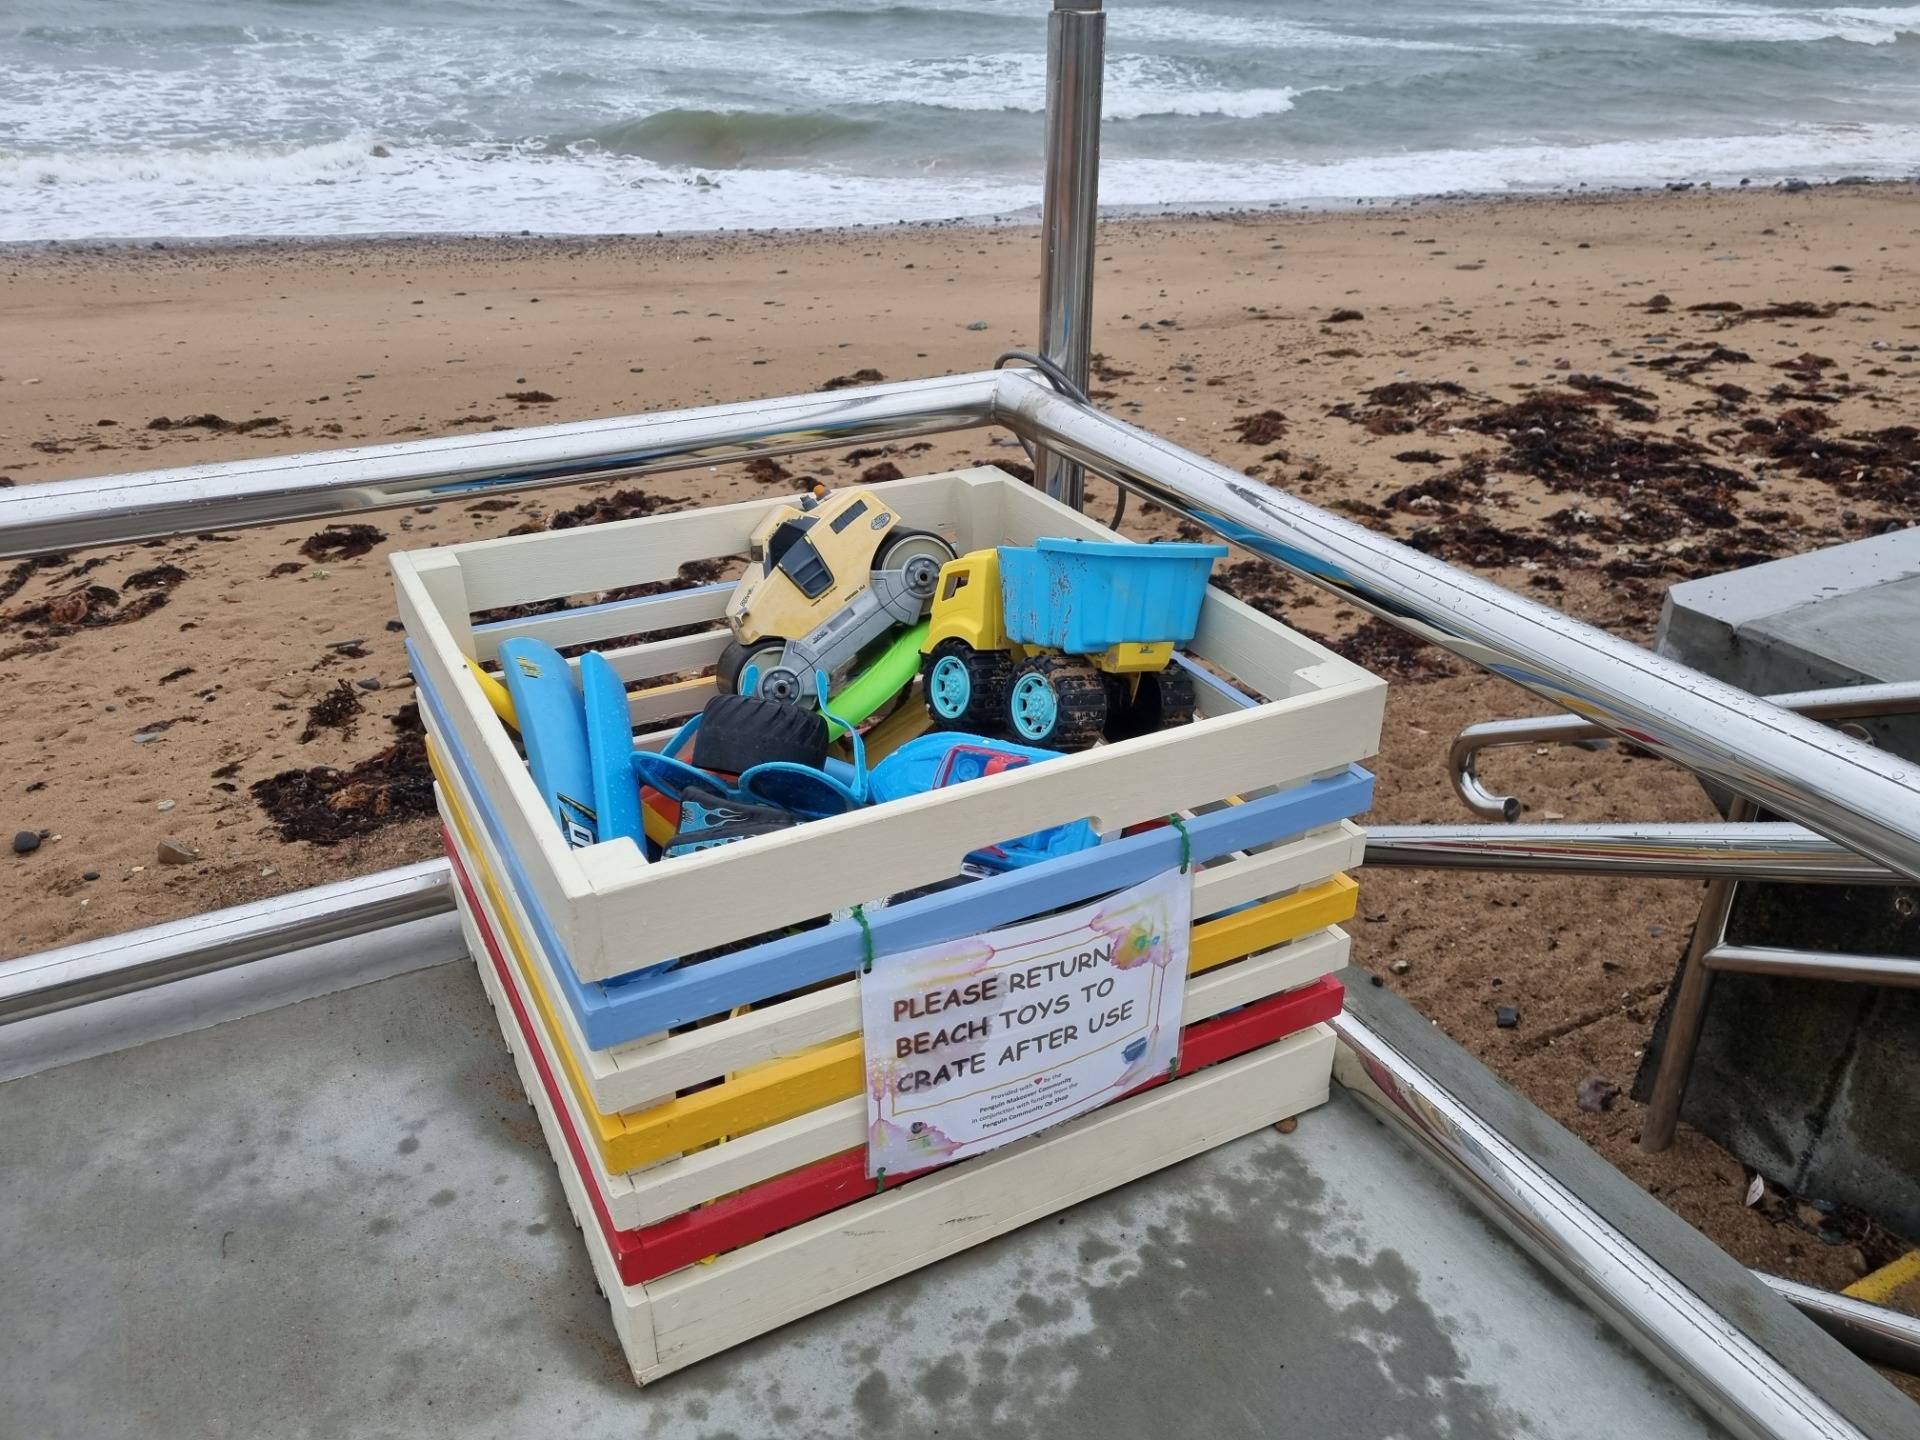 How cool: free loan beach toys. ”Please return after use,” was all that was asked.